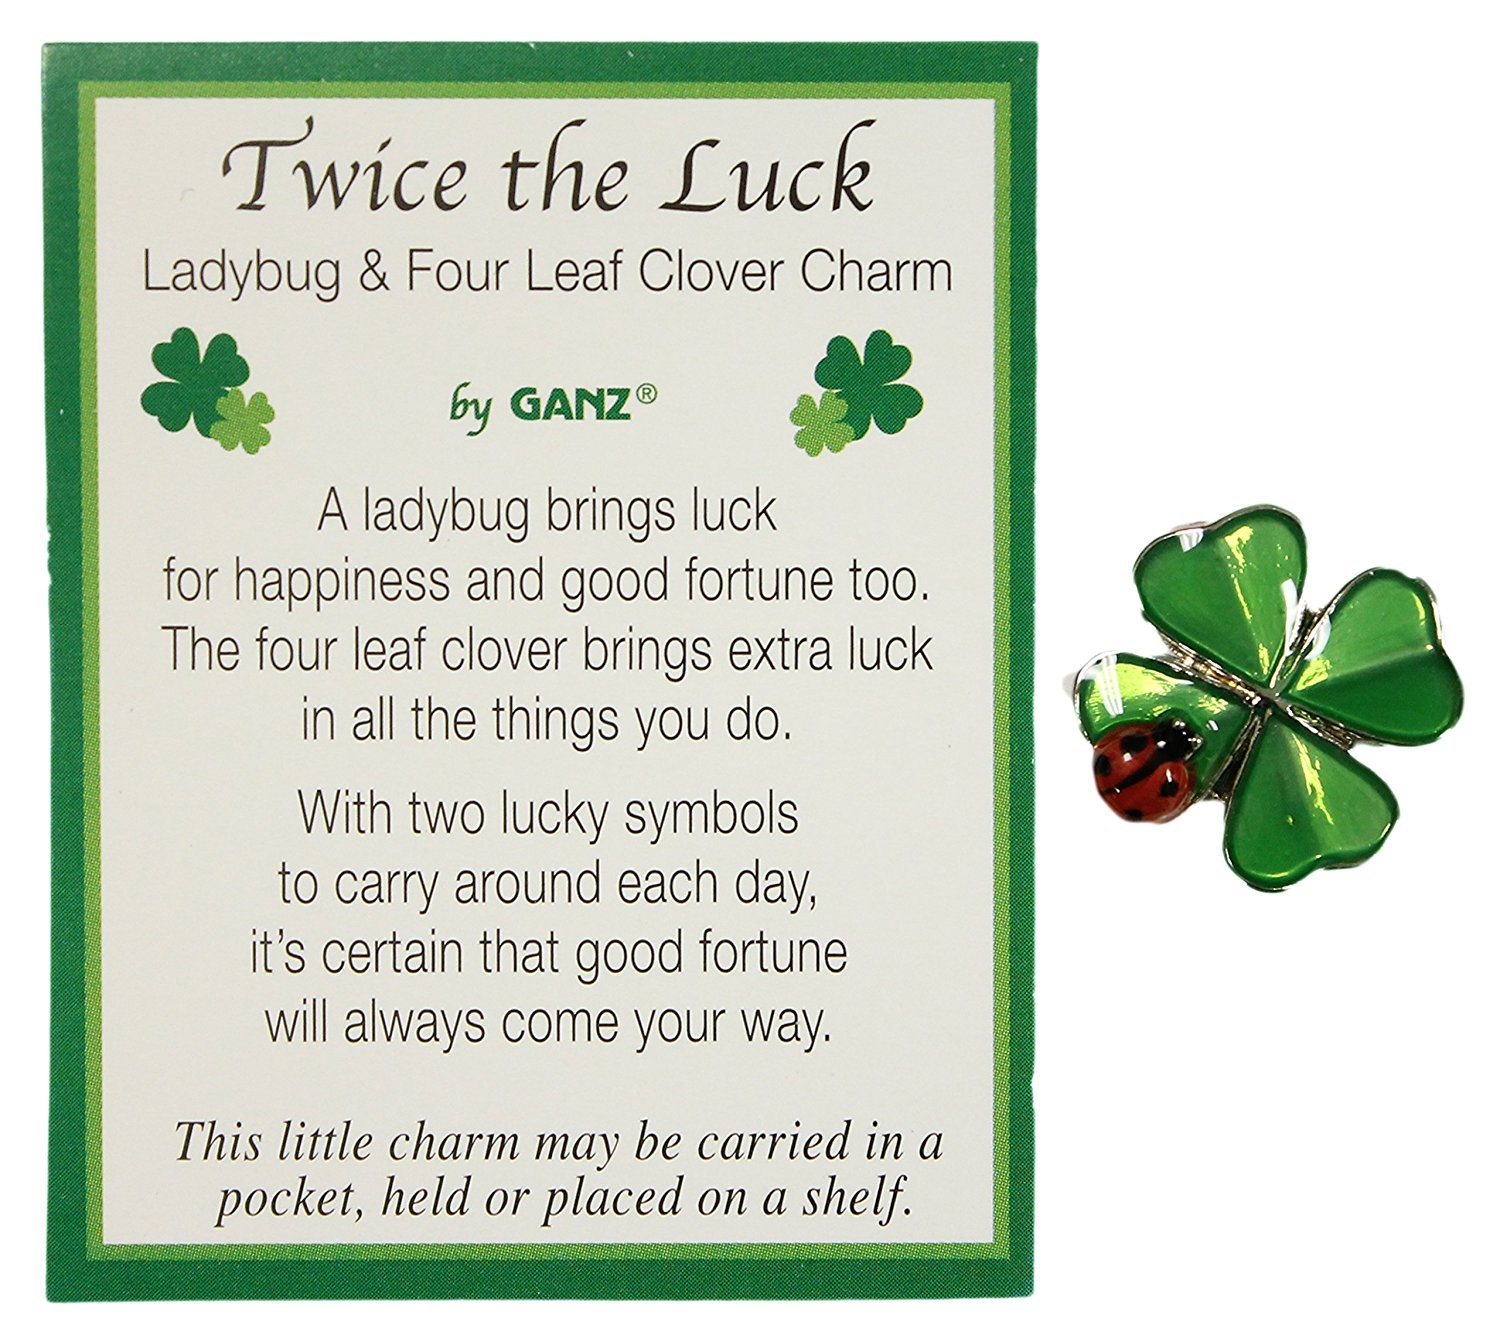 Amazon.com: 1 Ganz Twice the Luck Clover and Lady Bug Charm: Home ...